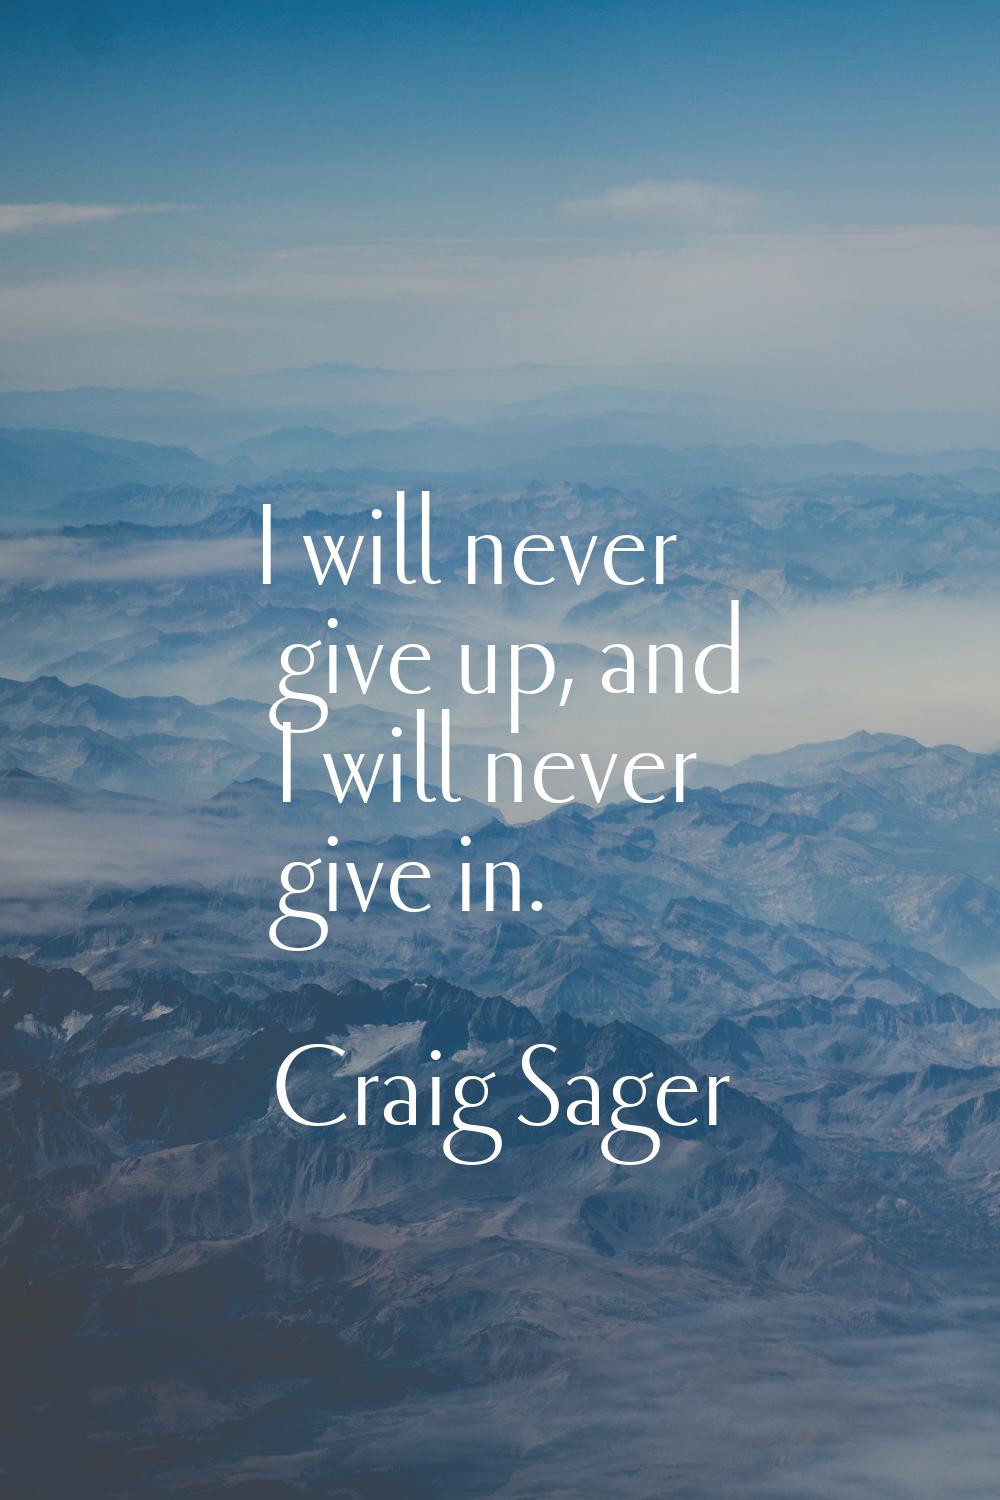 I will never give up, and I will never give in.